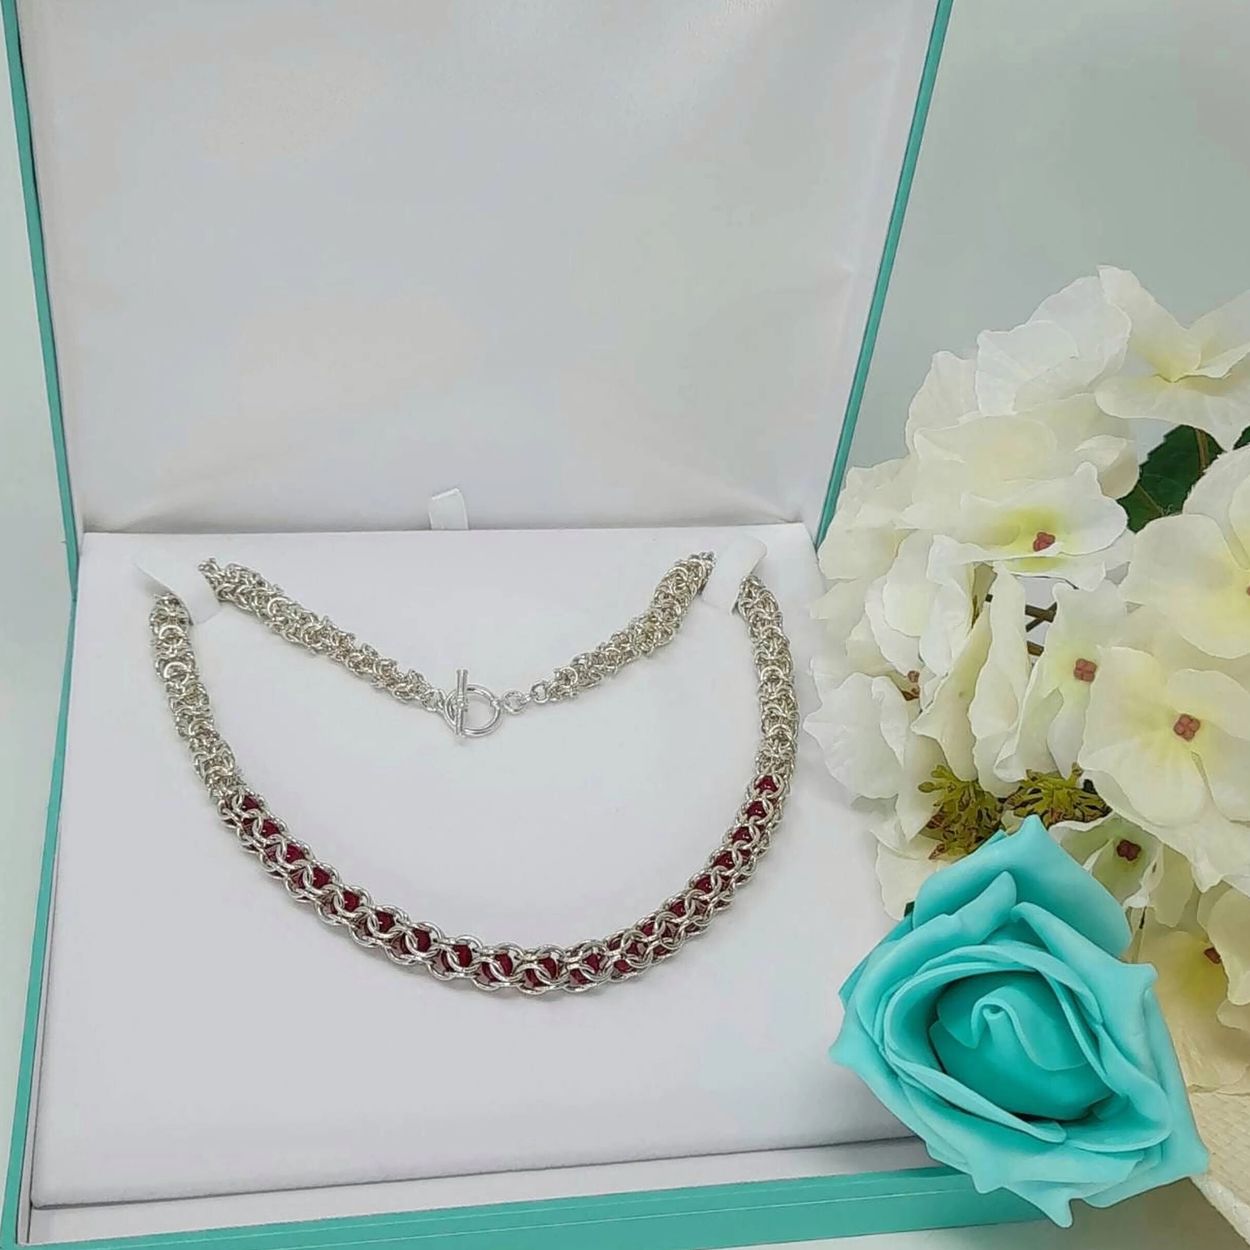 Handmade rose agate captive bead with Turkish roundmaille necklace in silver fill. Gift box included